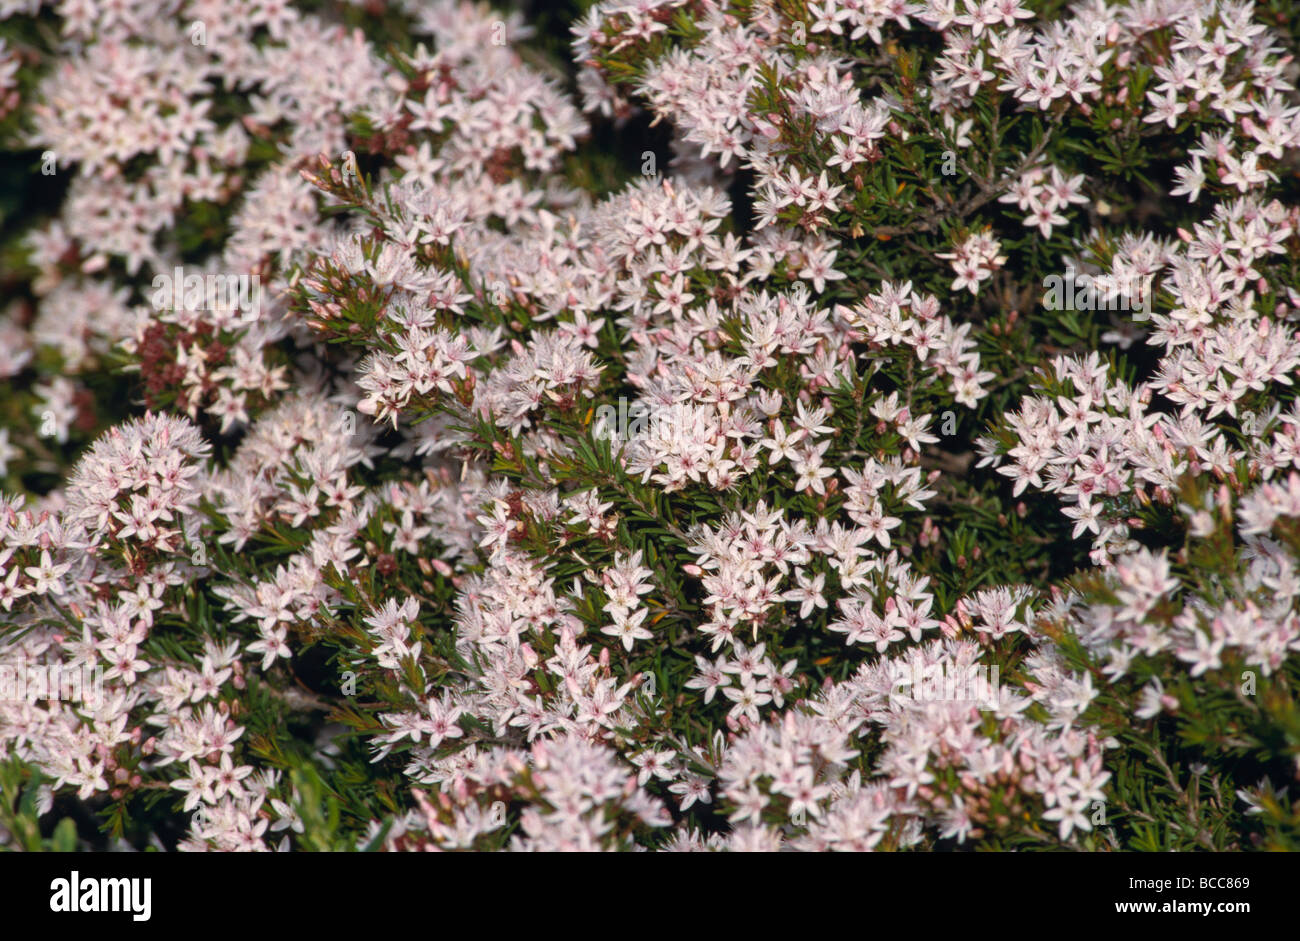 An island coastal shrub covered in prolific pink flowers. Stock Photo